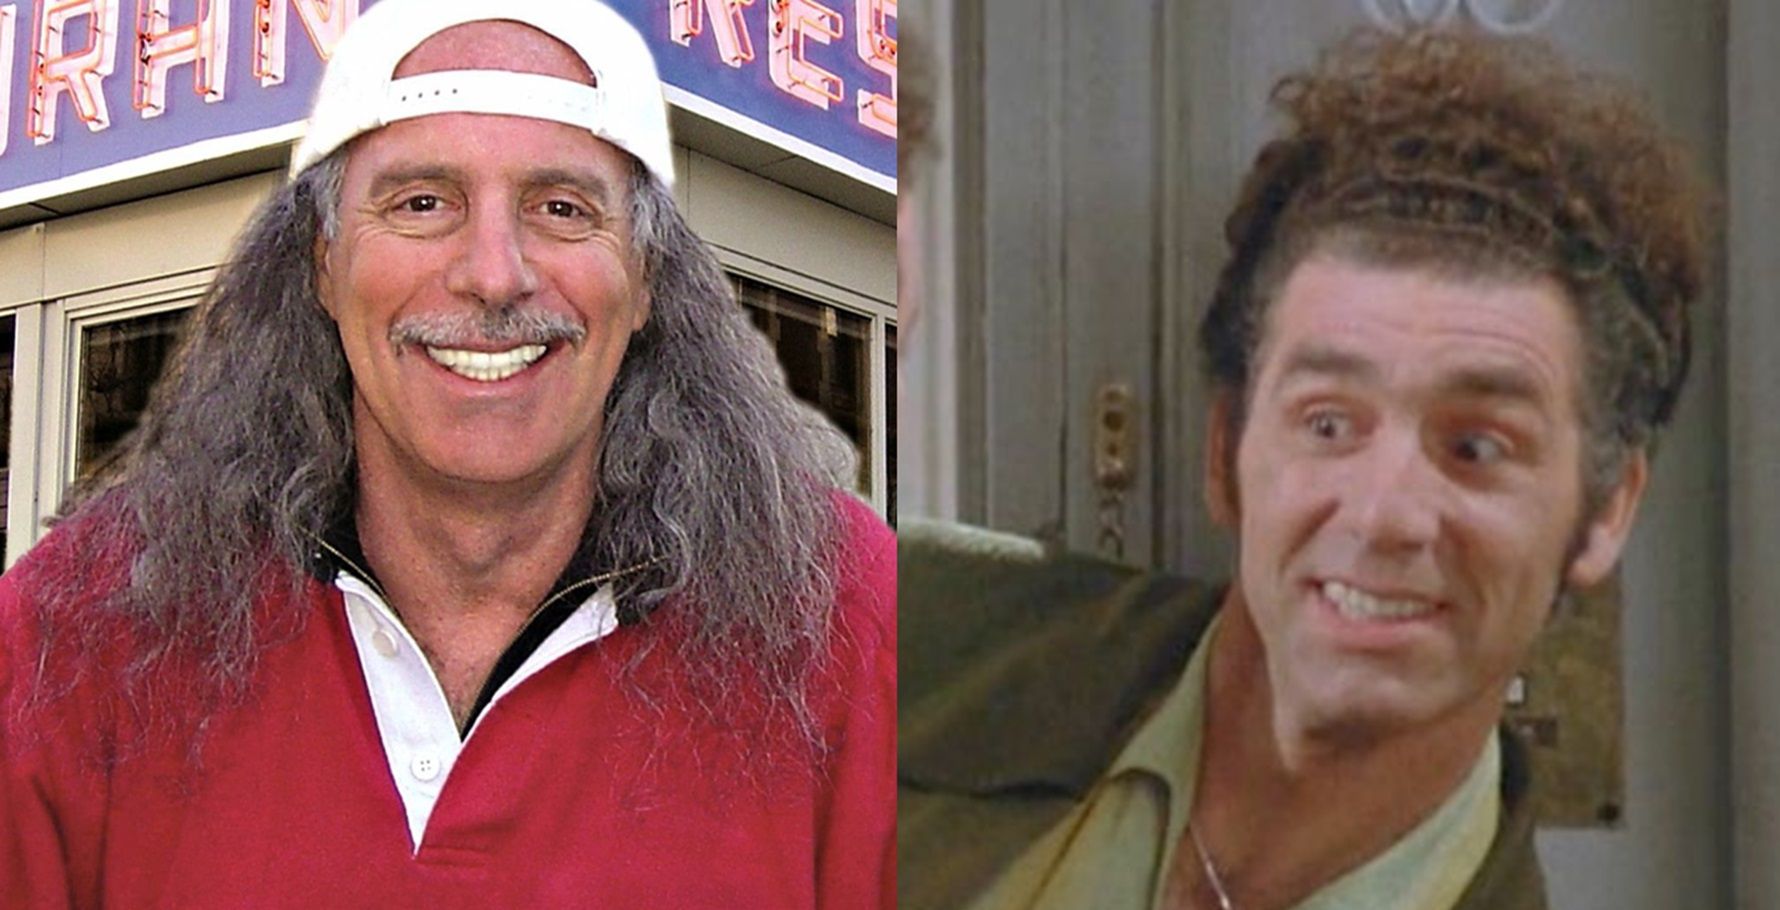 10 Seinfeld Characters And Their RealLife Counterparts